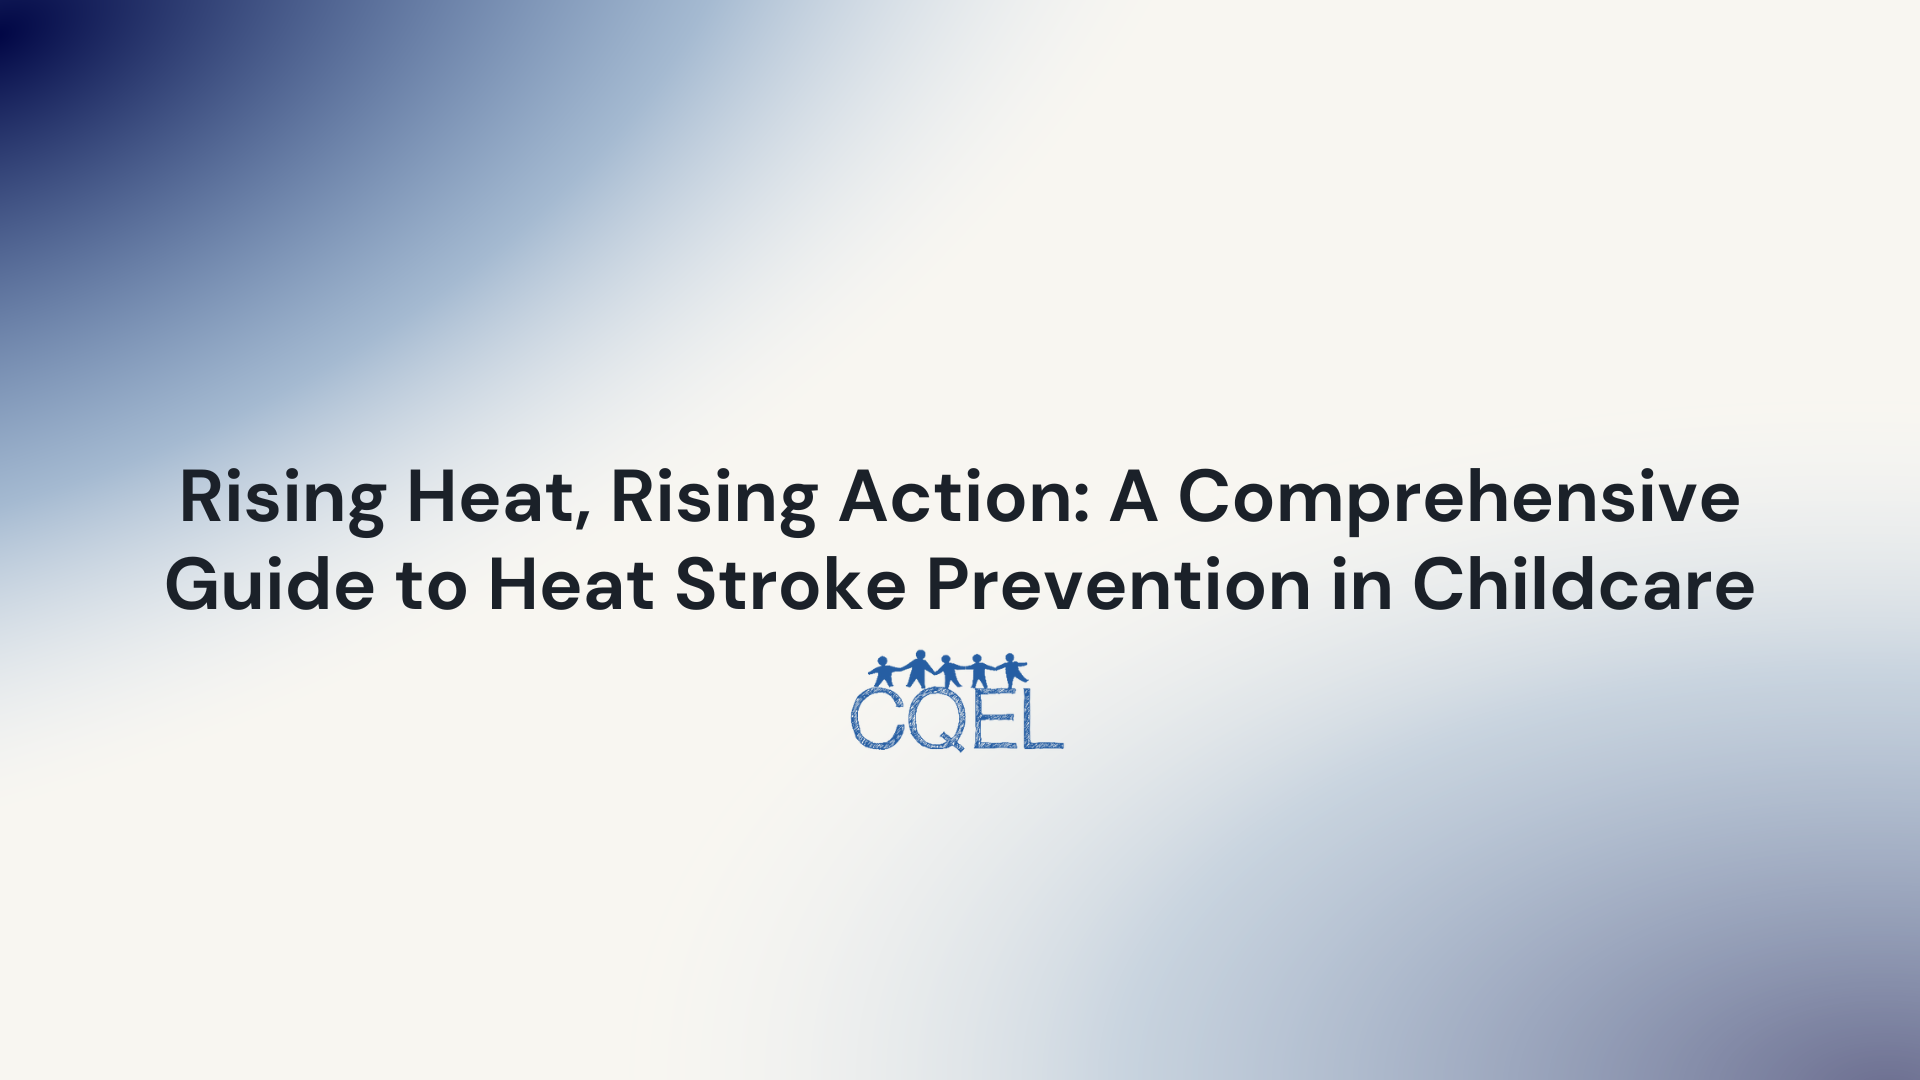 Rising Heat, Rising Action: A Comprehensive Guide to Heat Stroke Prevention in Childcare